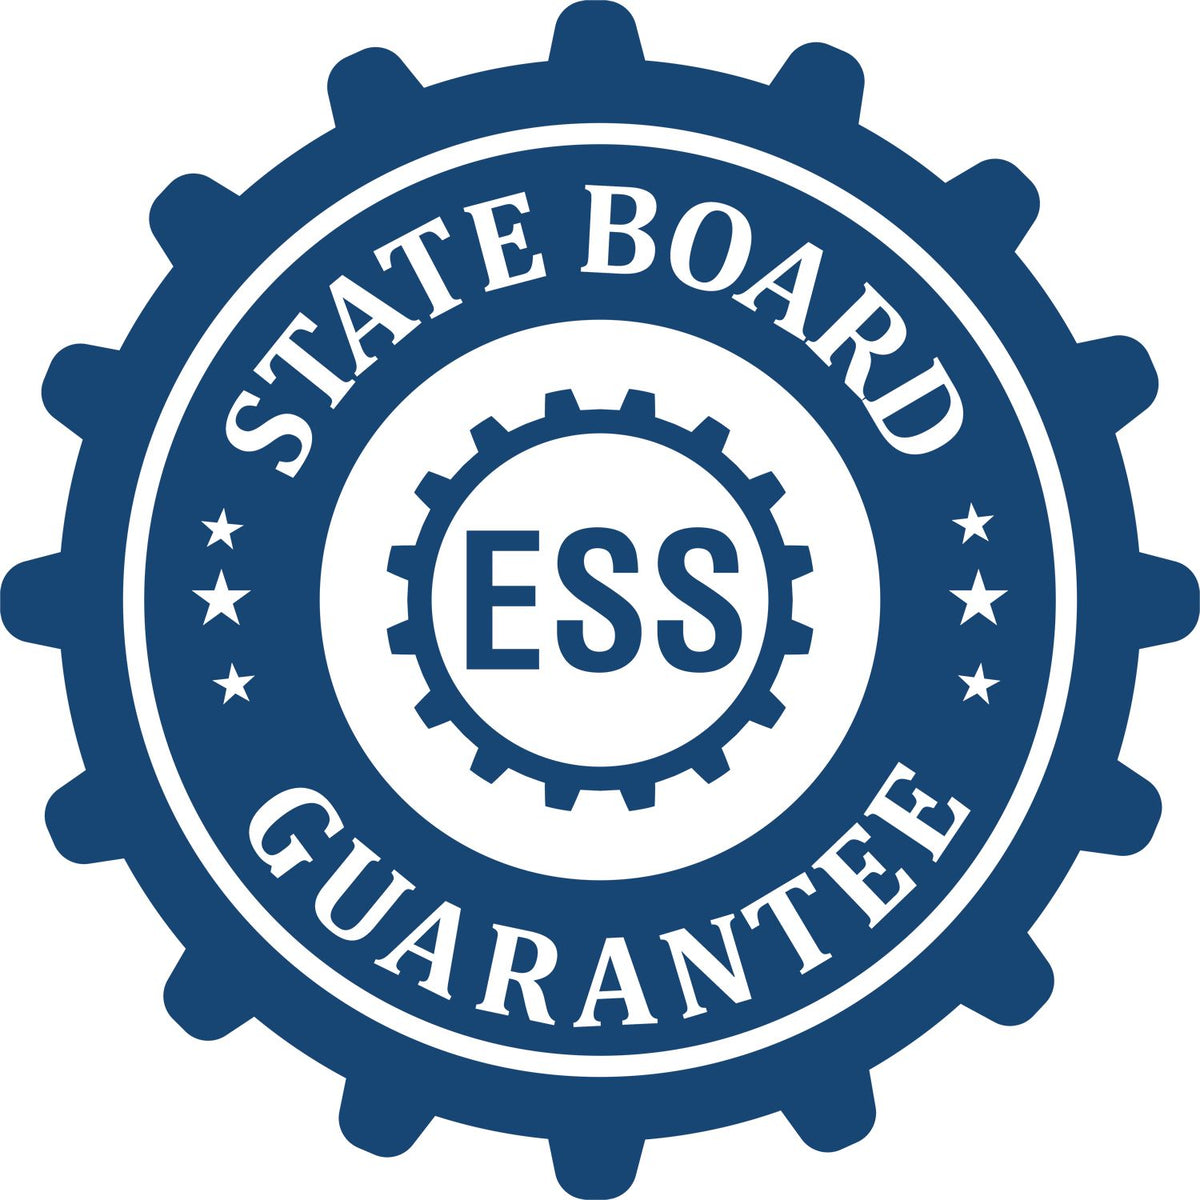 An emblem in a gear shape illustrating a state board guarantee for the Wooden Handle Iowa State Seal Notary Public Stamp product.